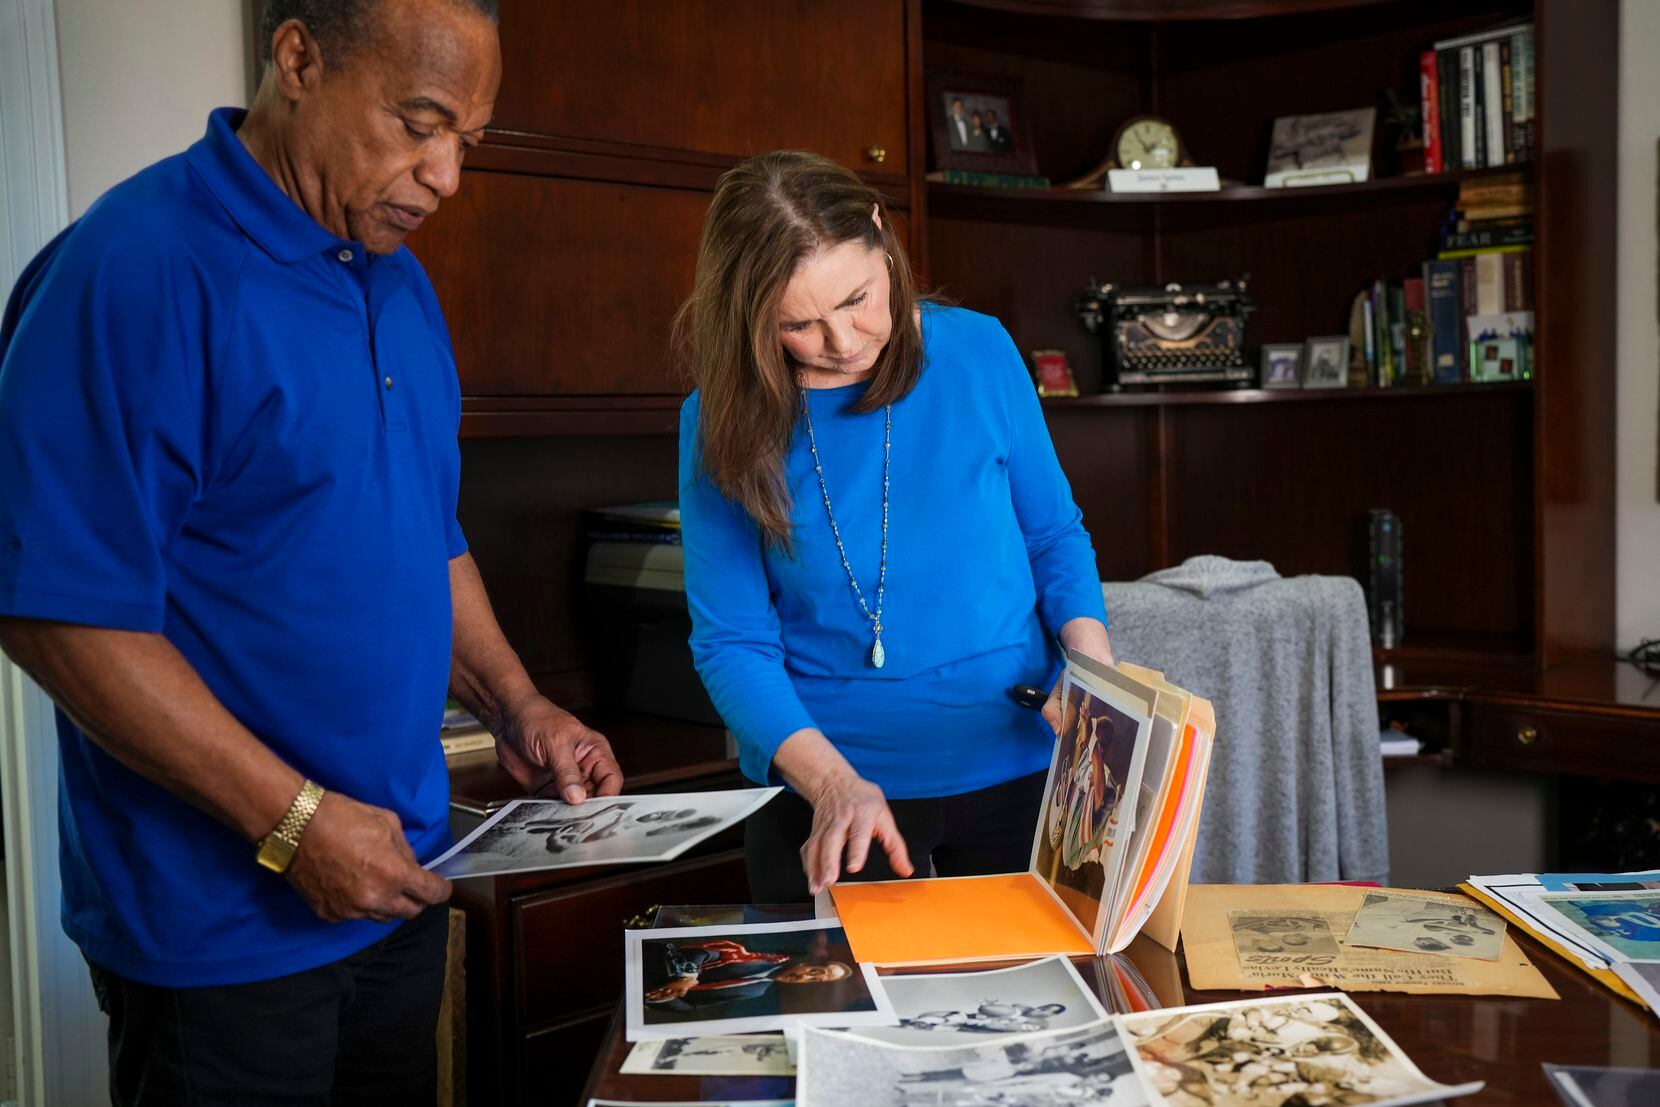 LeVias and his wife, Janice, flip through old photos at their home on Thursday, Jan. 5, 2023.